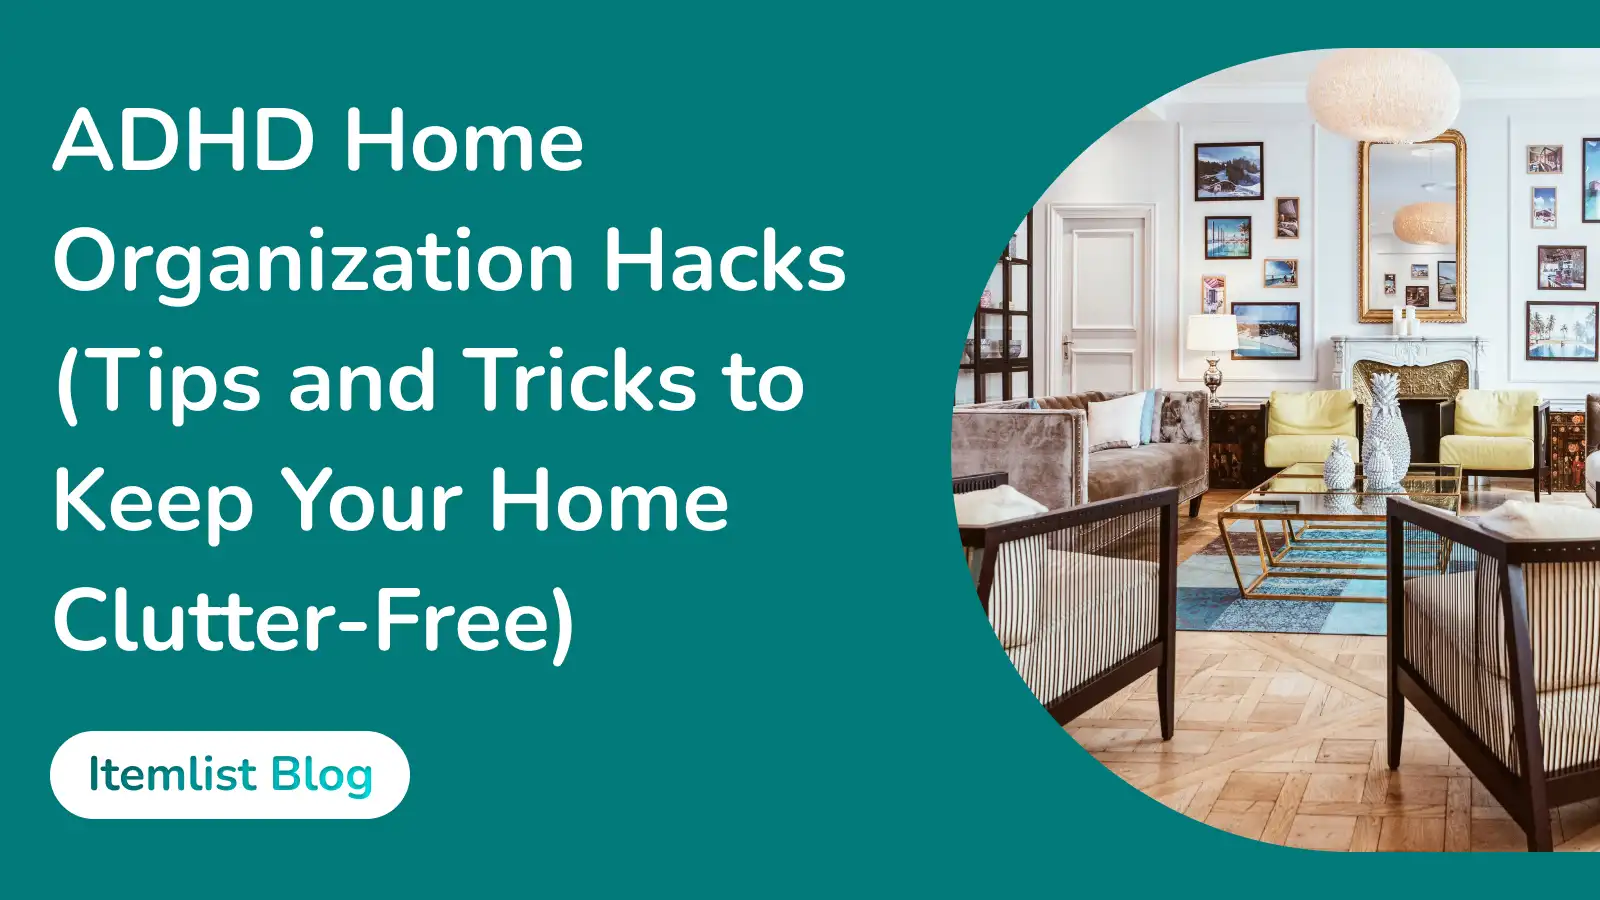 ADHD Home Organization Hacks (Tips and Tricks to Keep Your Home Clutter-Free)